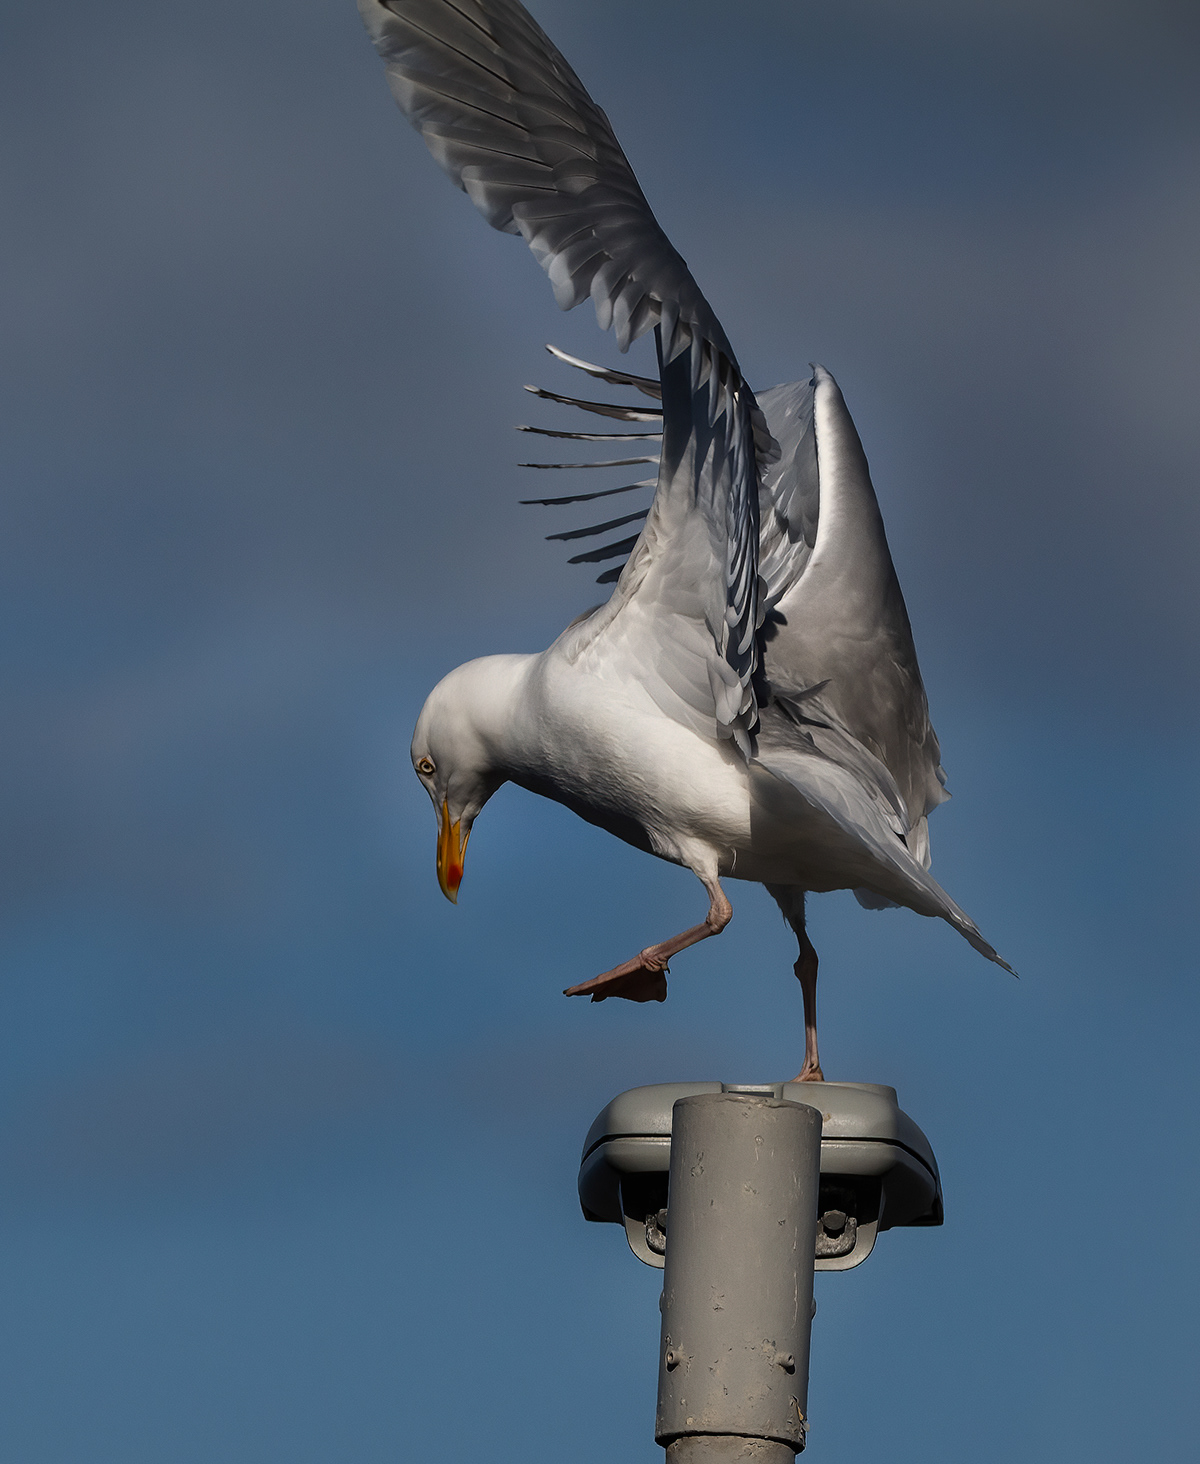 Herring gull about to take off from a lamp post